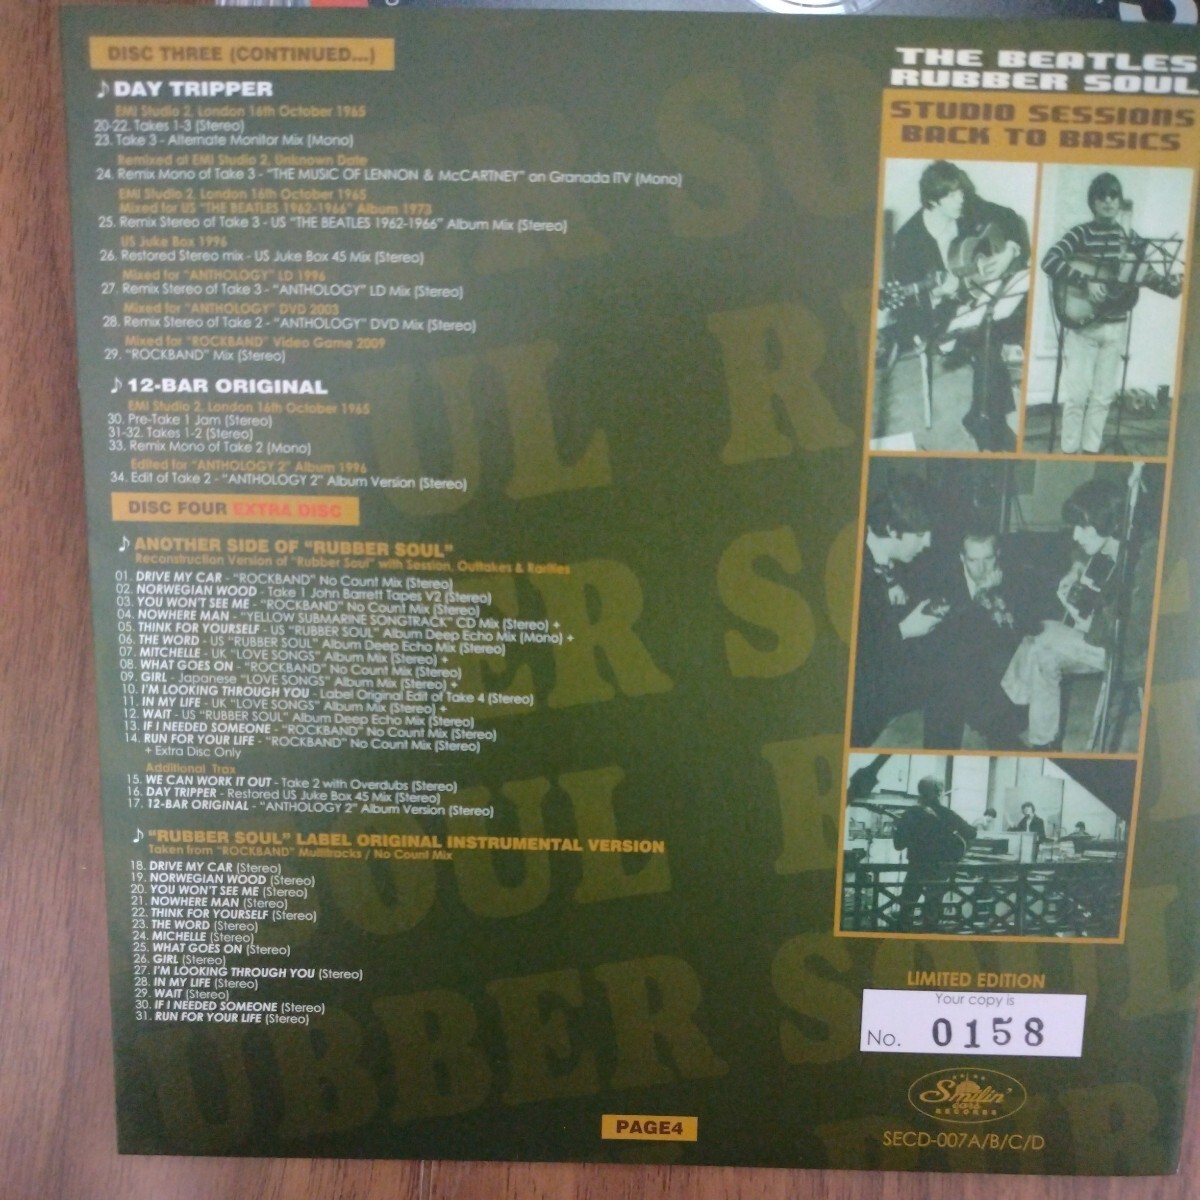 THE BEATLES / RUBBER SOUL STUDIO SESSIONS BACK TO BASICS （4CD）SMILN' EARS SECD-007A/B/C/D_画像5